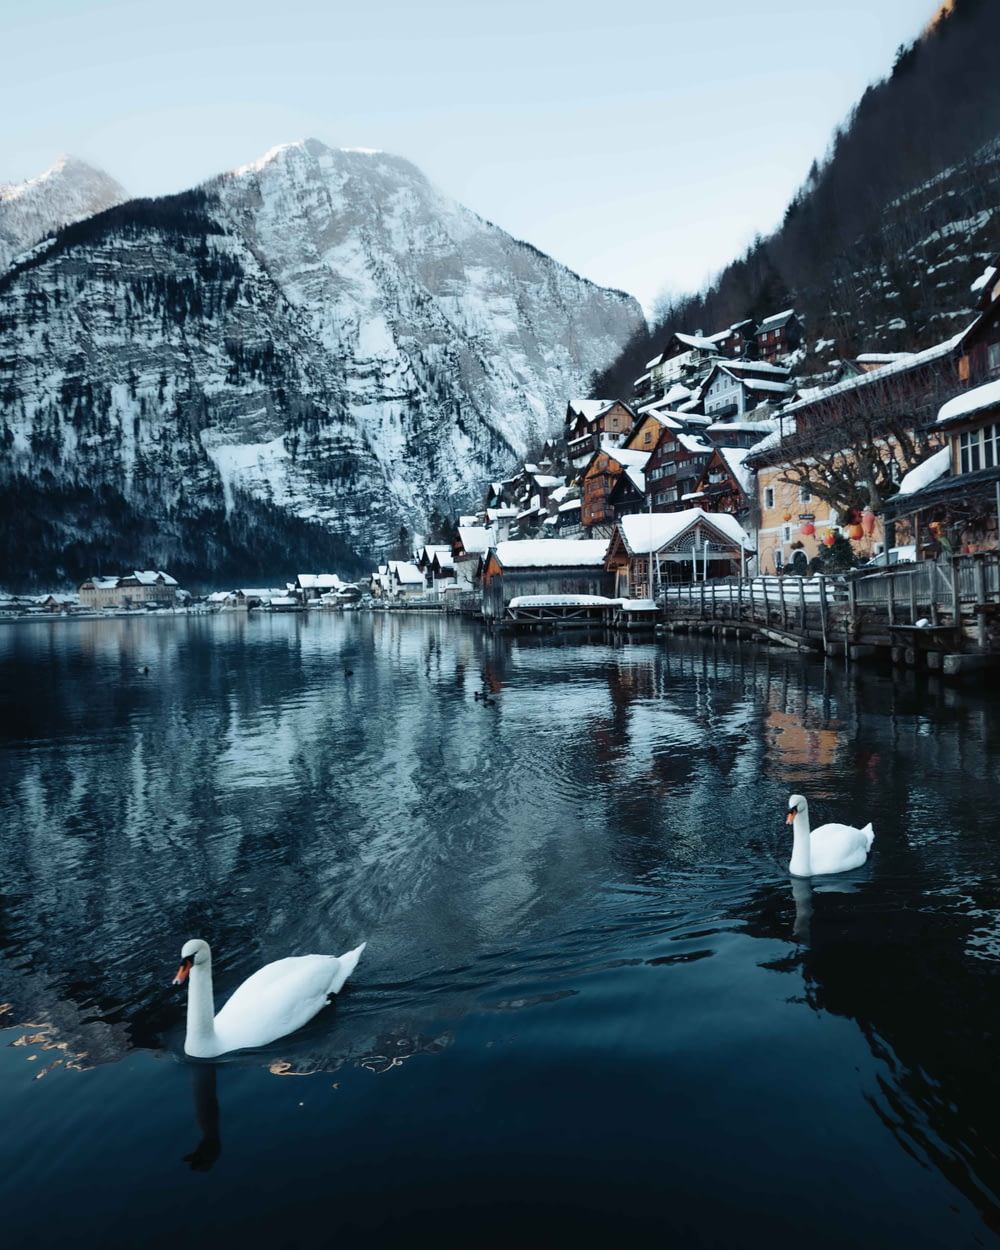 white swan on water near houses and mountain during daytime